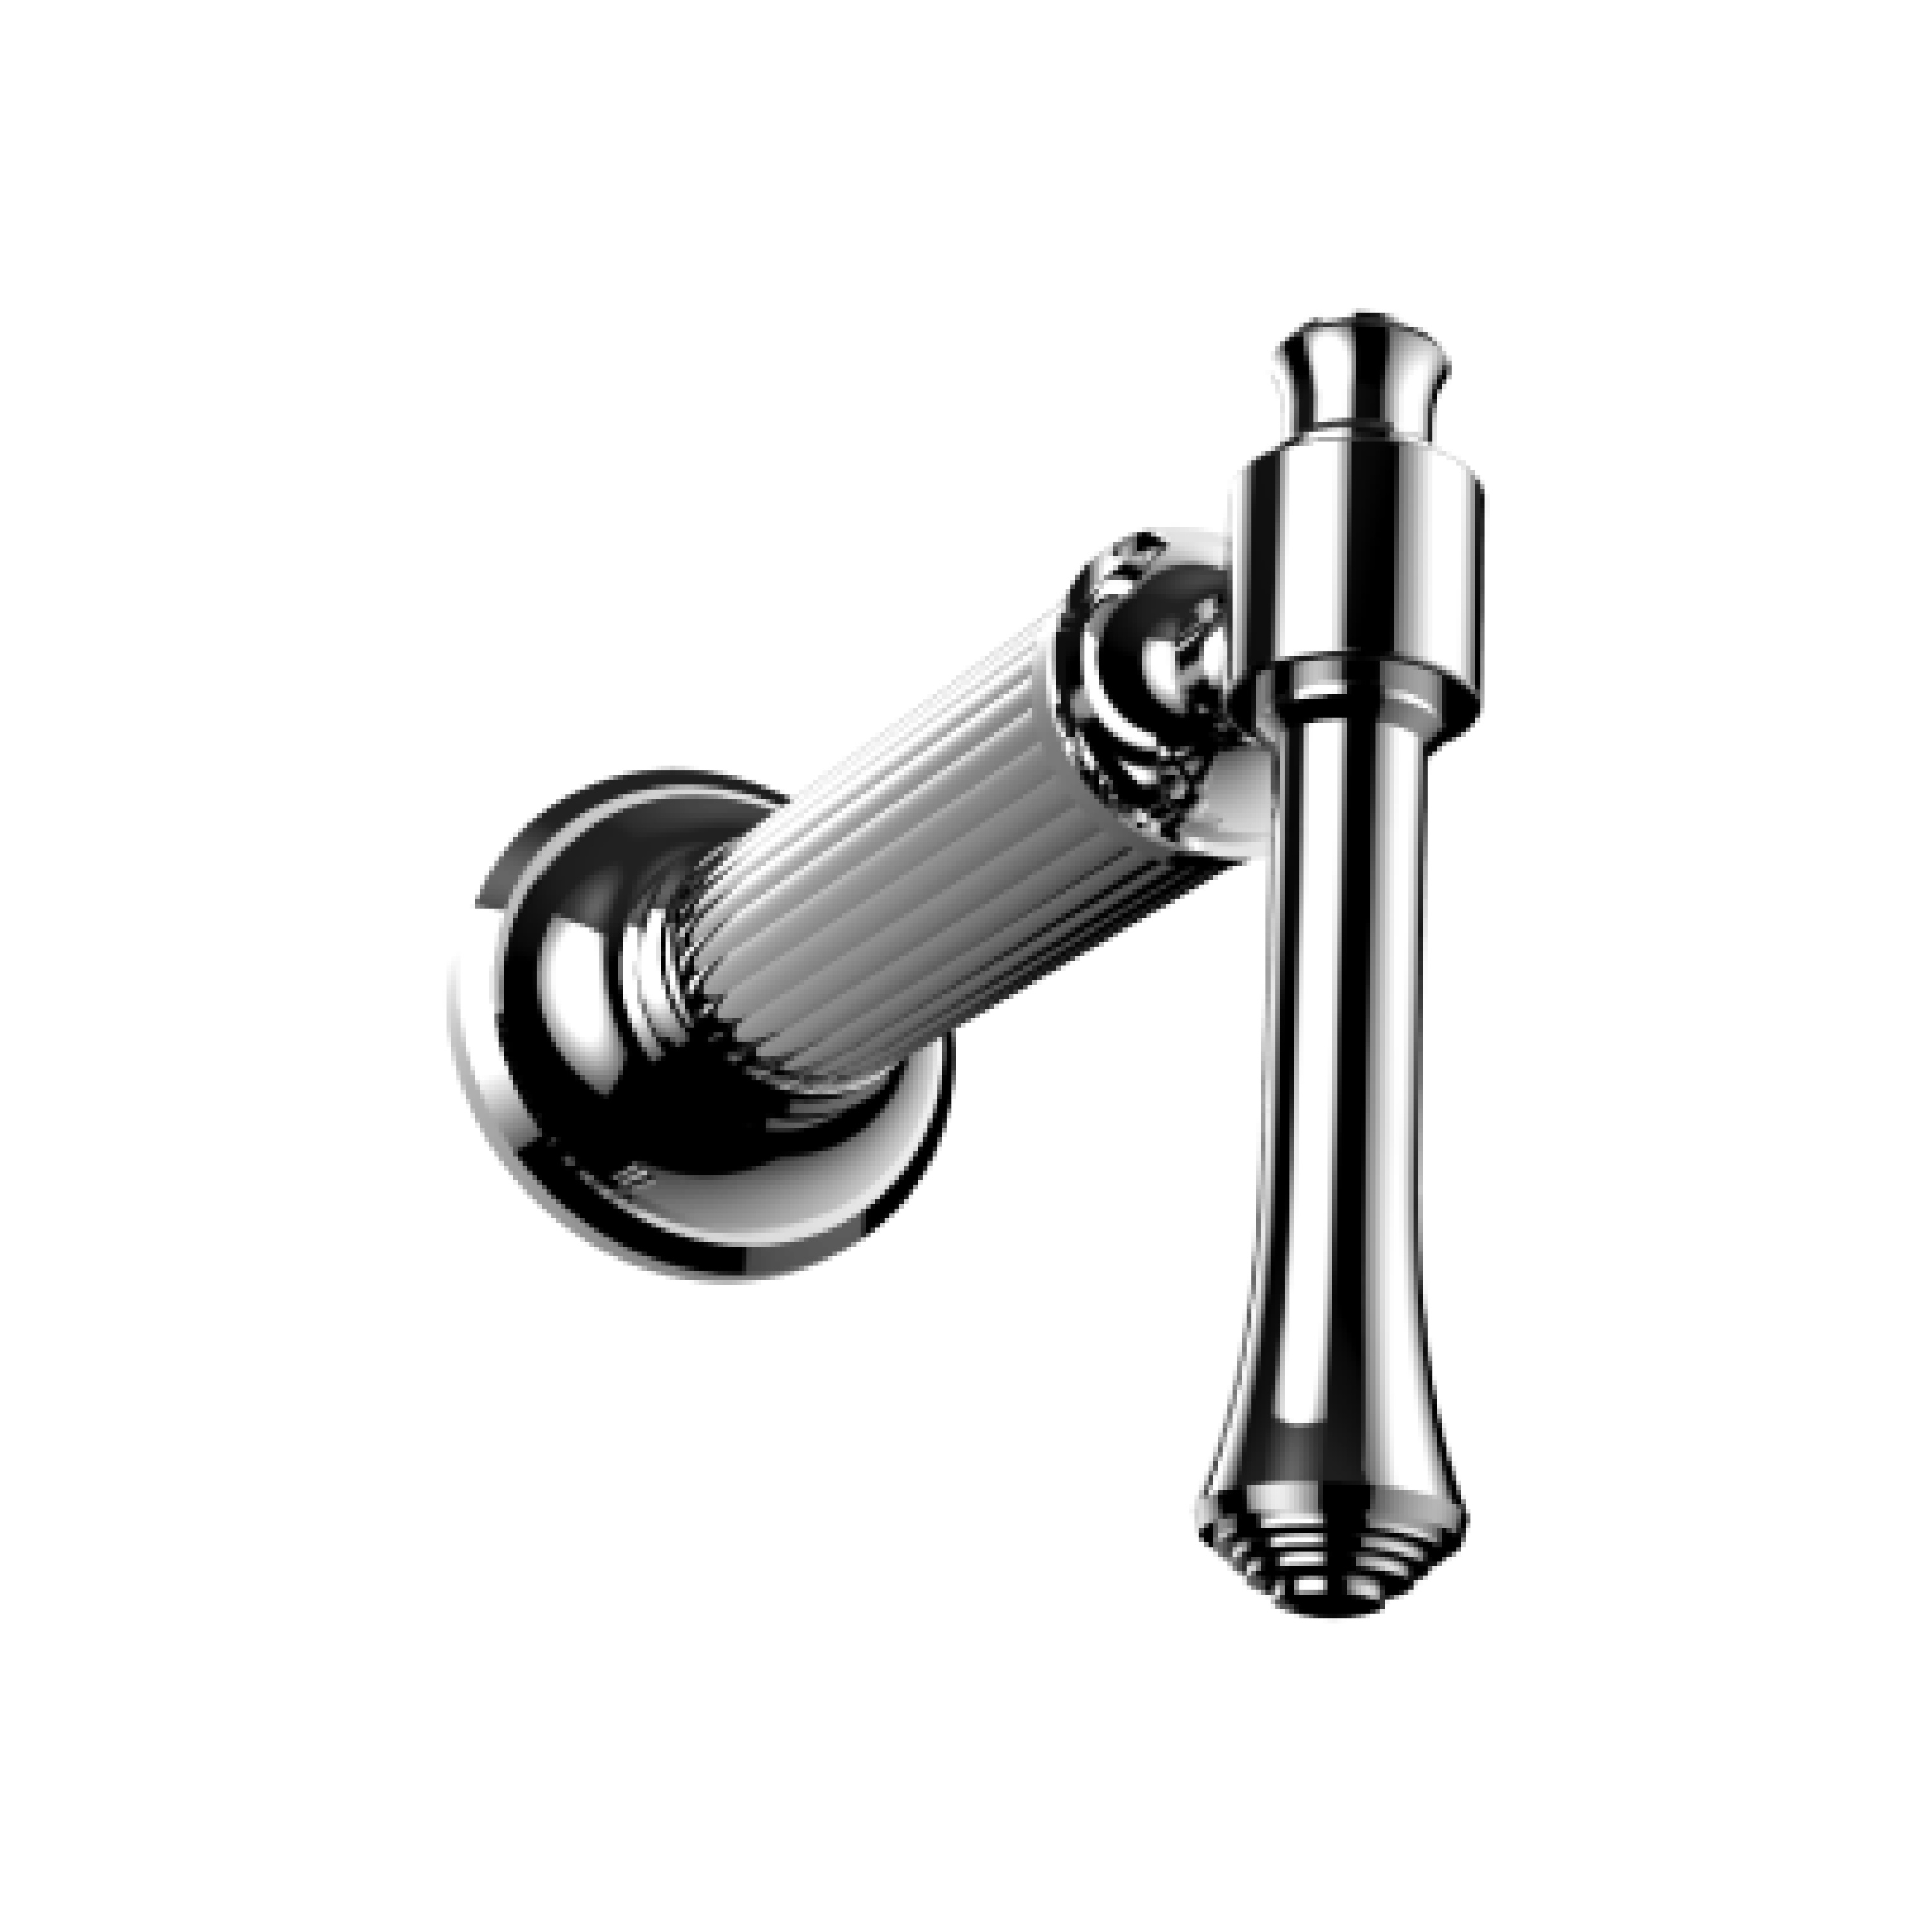 Santec YY-AT10-TM Athena II Wall Mount Volume Control/Diverter Handle Trim with AT Handle - Polished Chrome